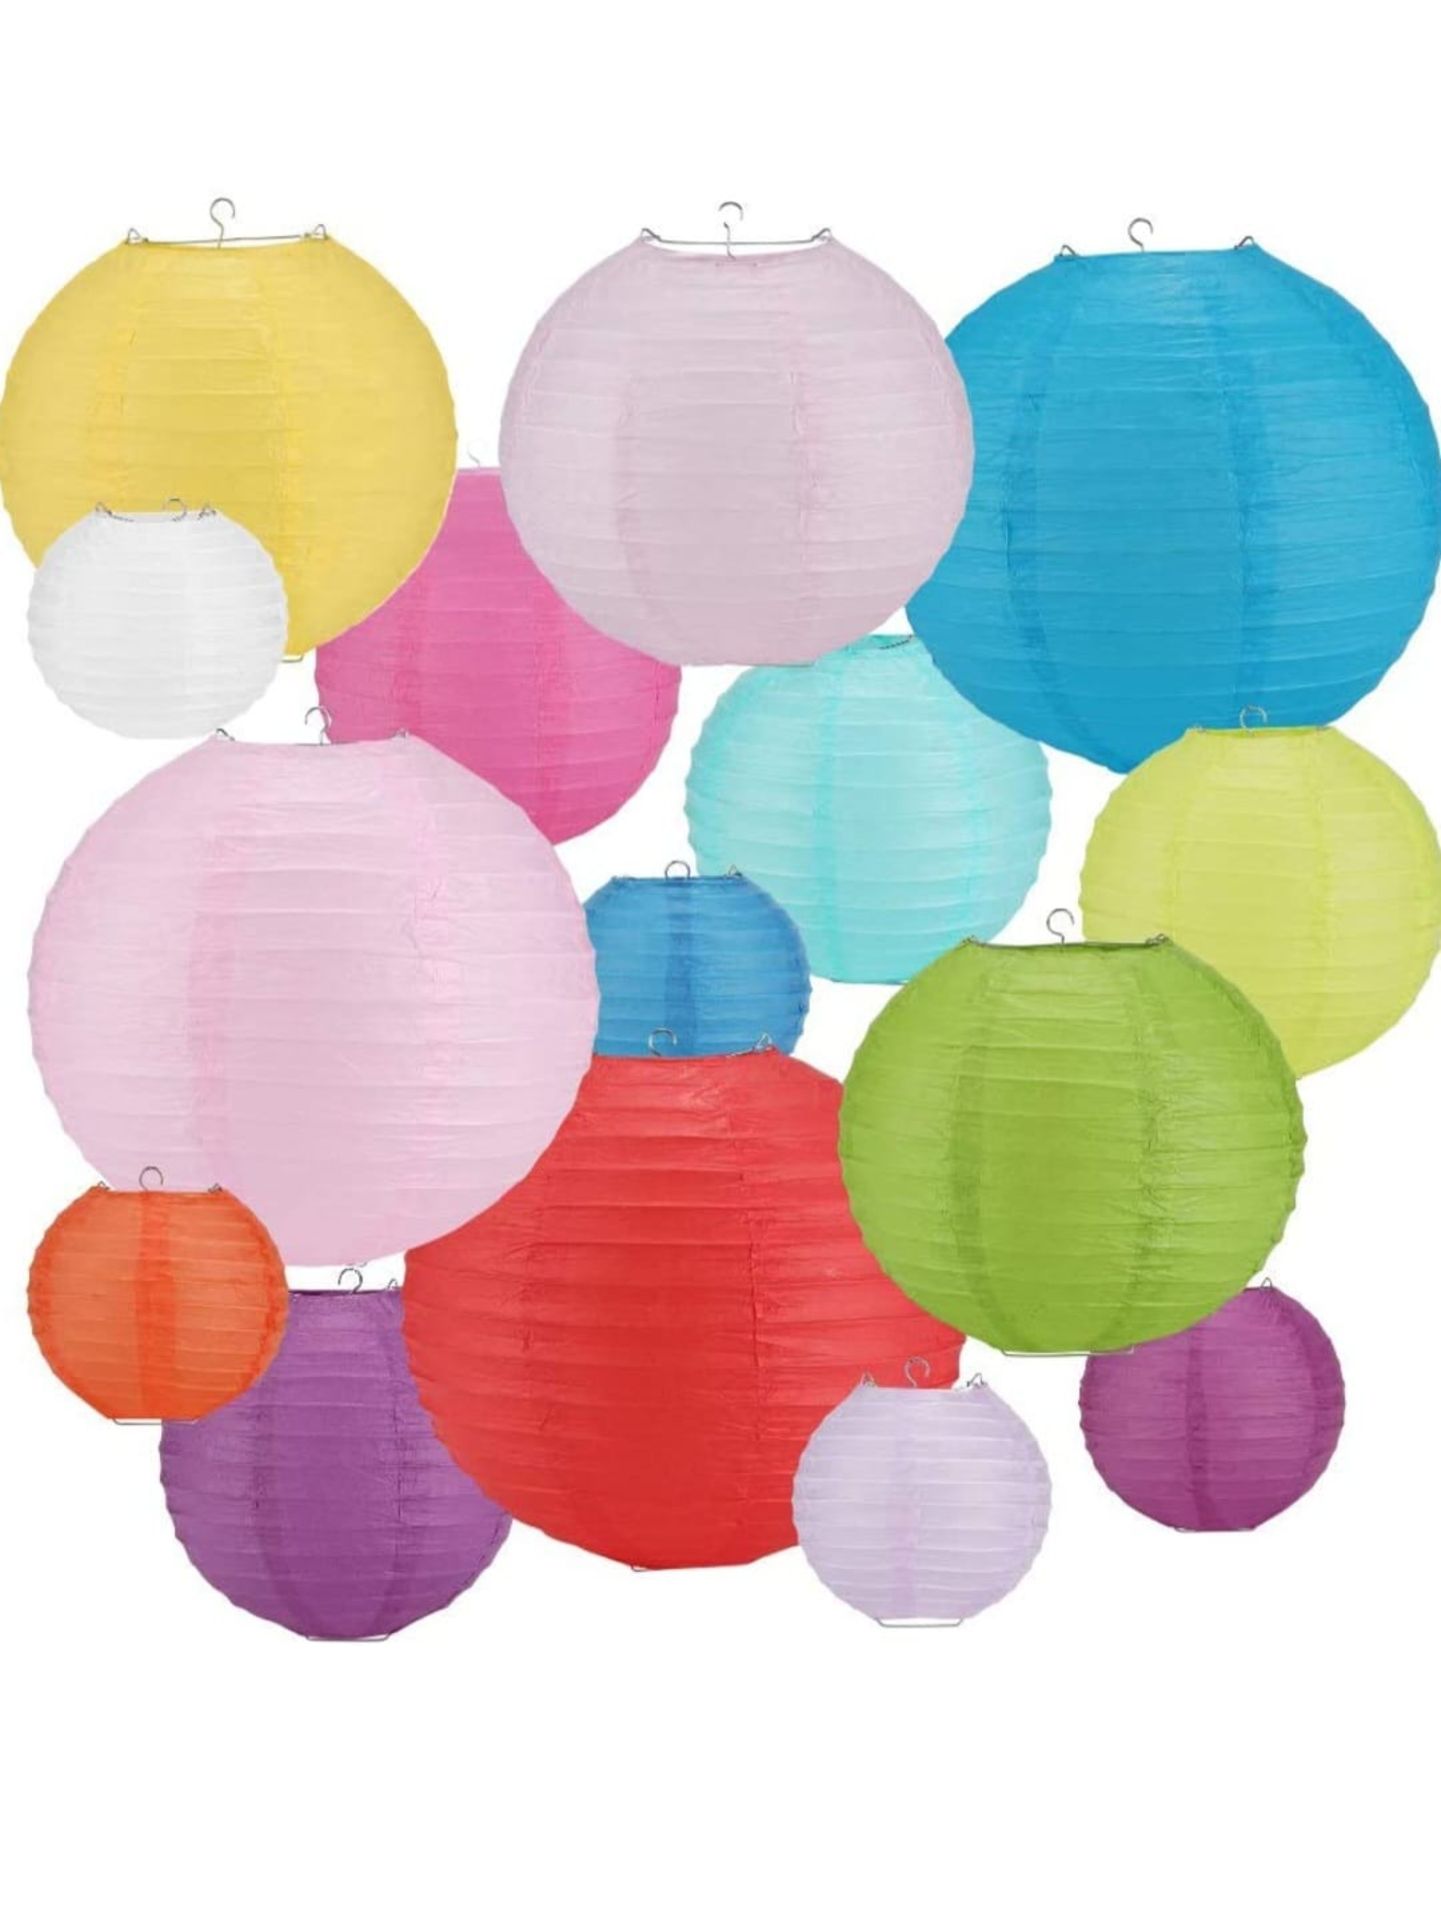 PALLET OF OVER 400 ALL BRAND NEW & BOXED PAPER LANTERNS COLOURS MAY VARY - SALEROOM ON TOP OF